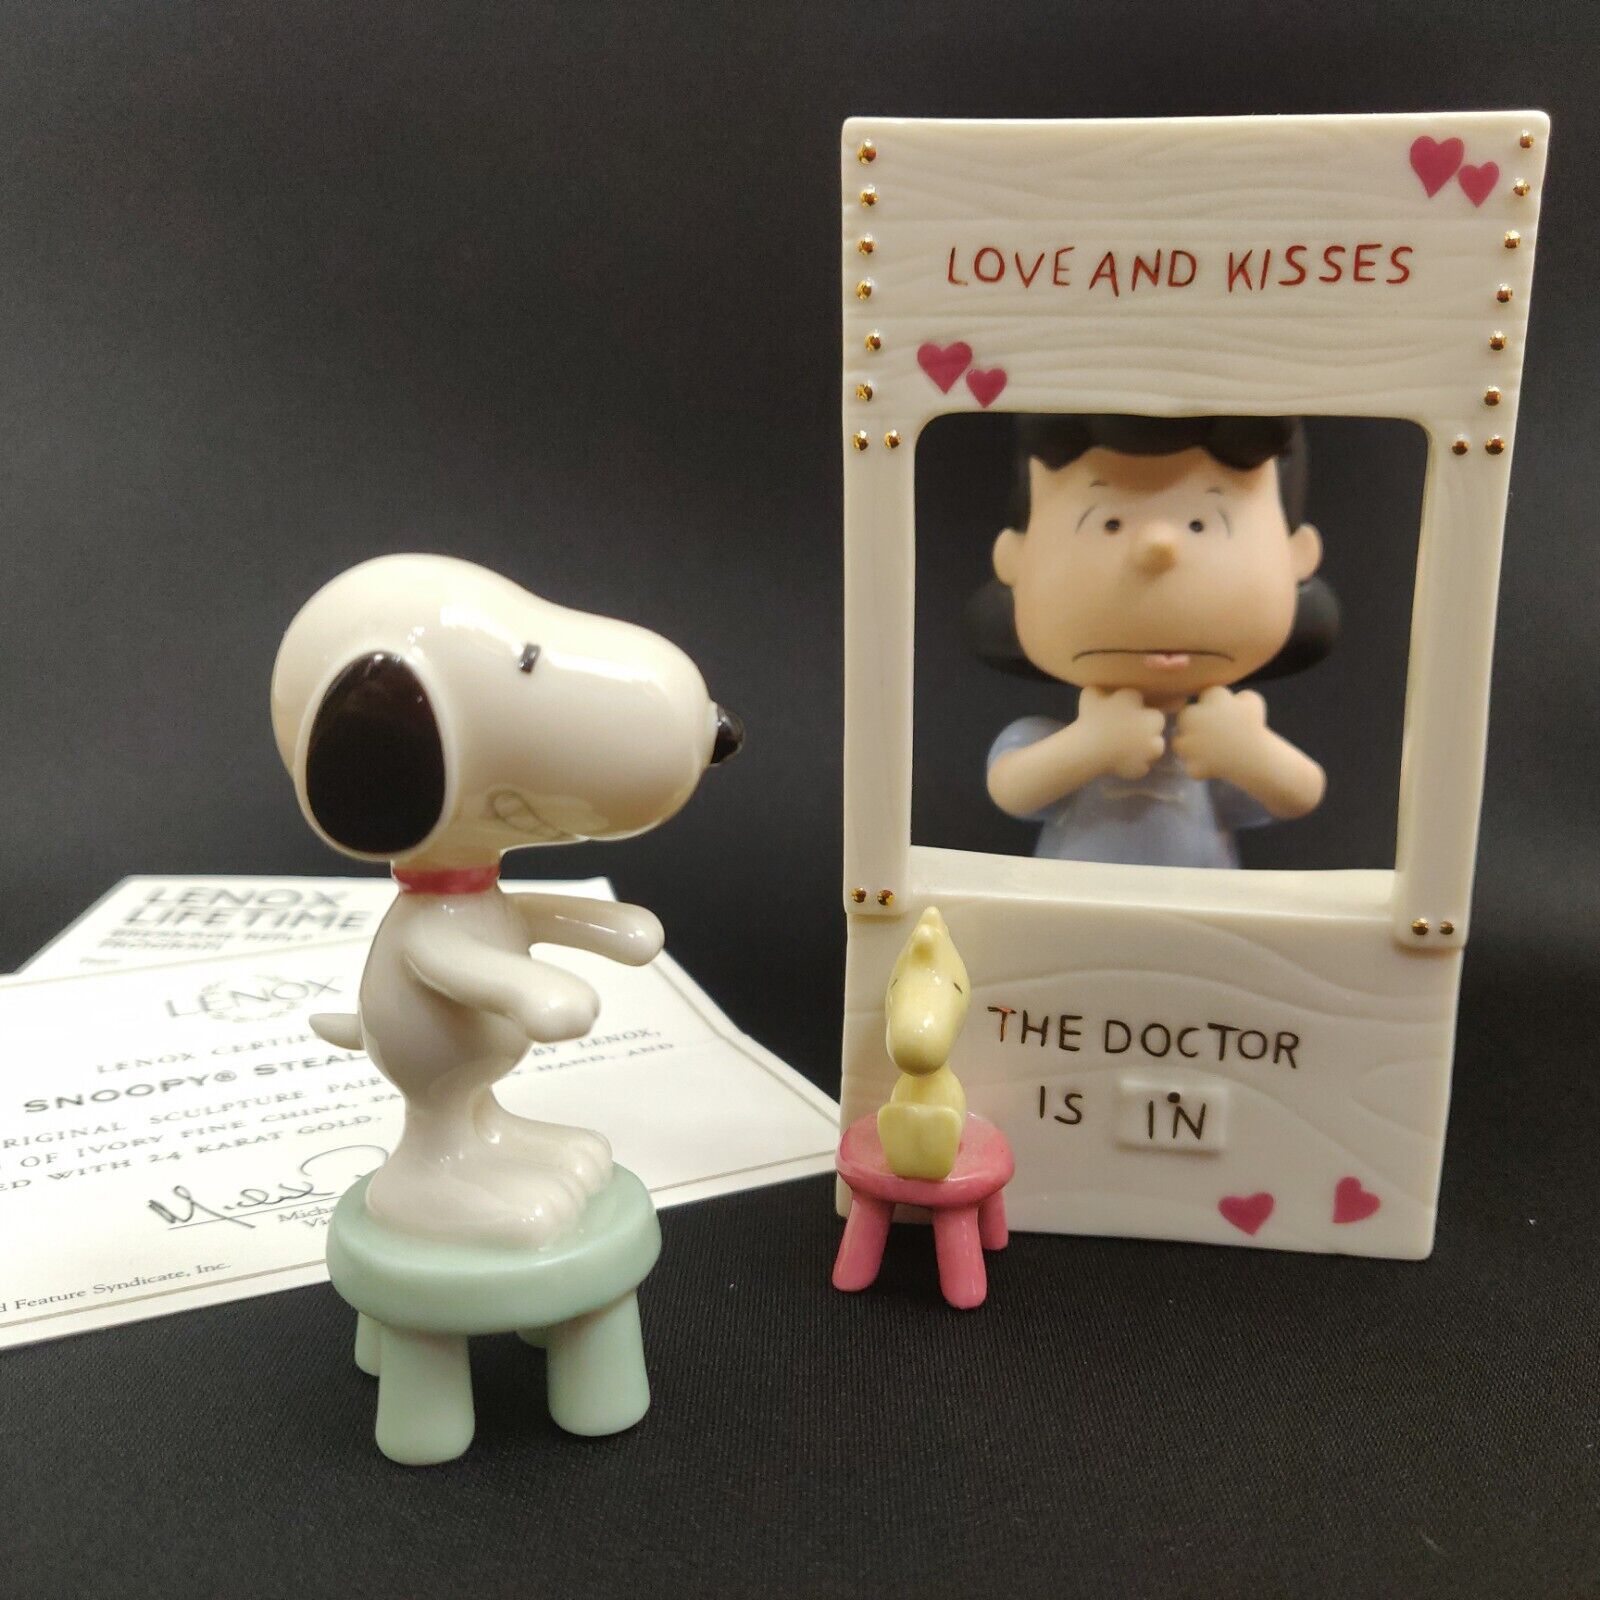 LENOX Peanuts SNOOPY STEALS A KISS Lucy Woodstock Complete in Original Box + COA